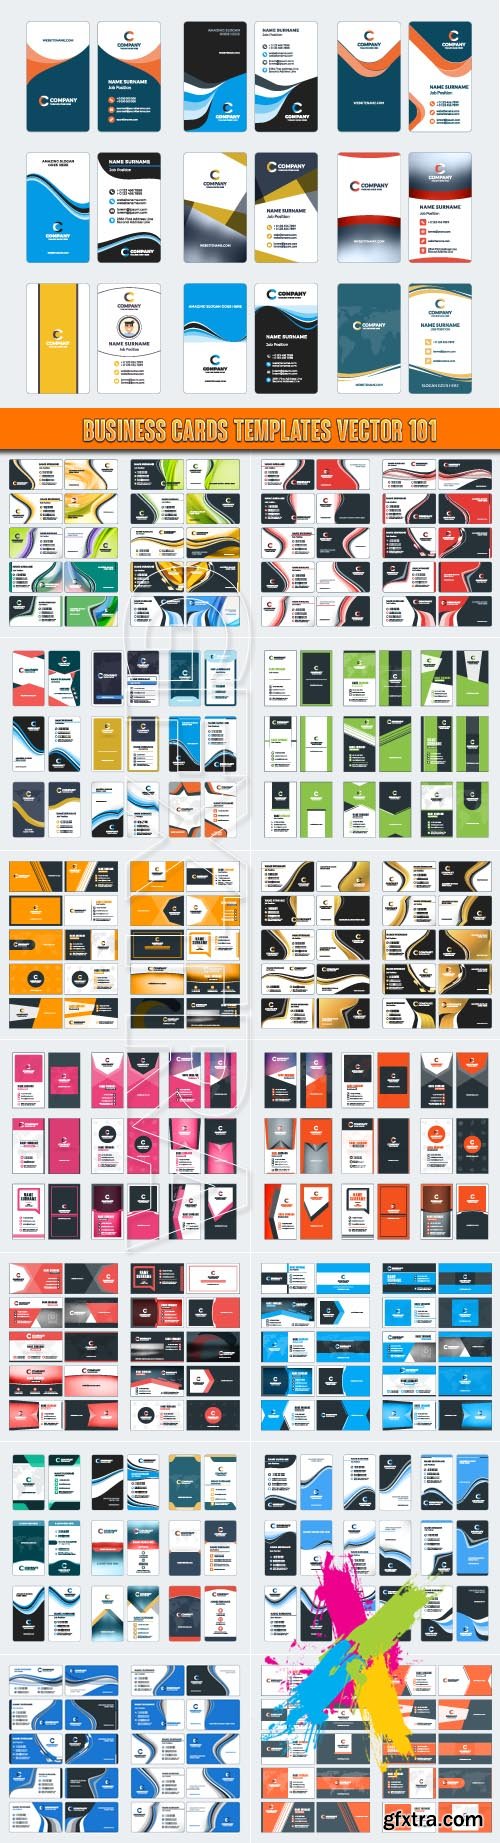 Business Cards Templates vector 101